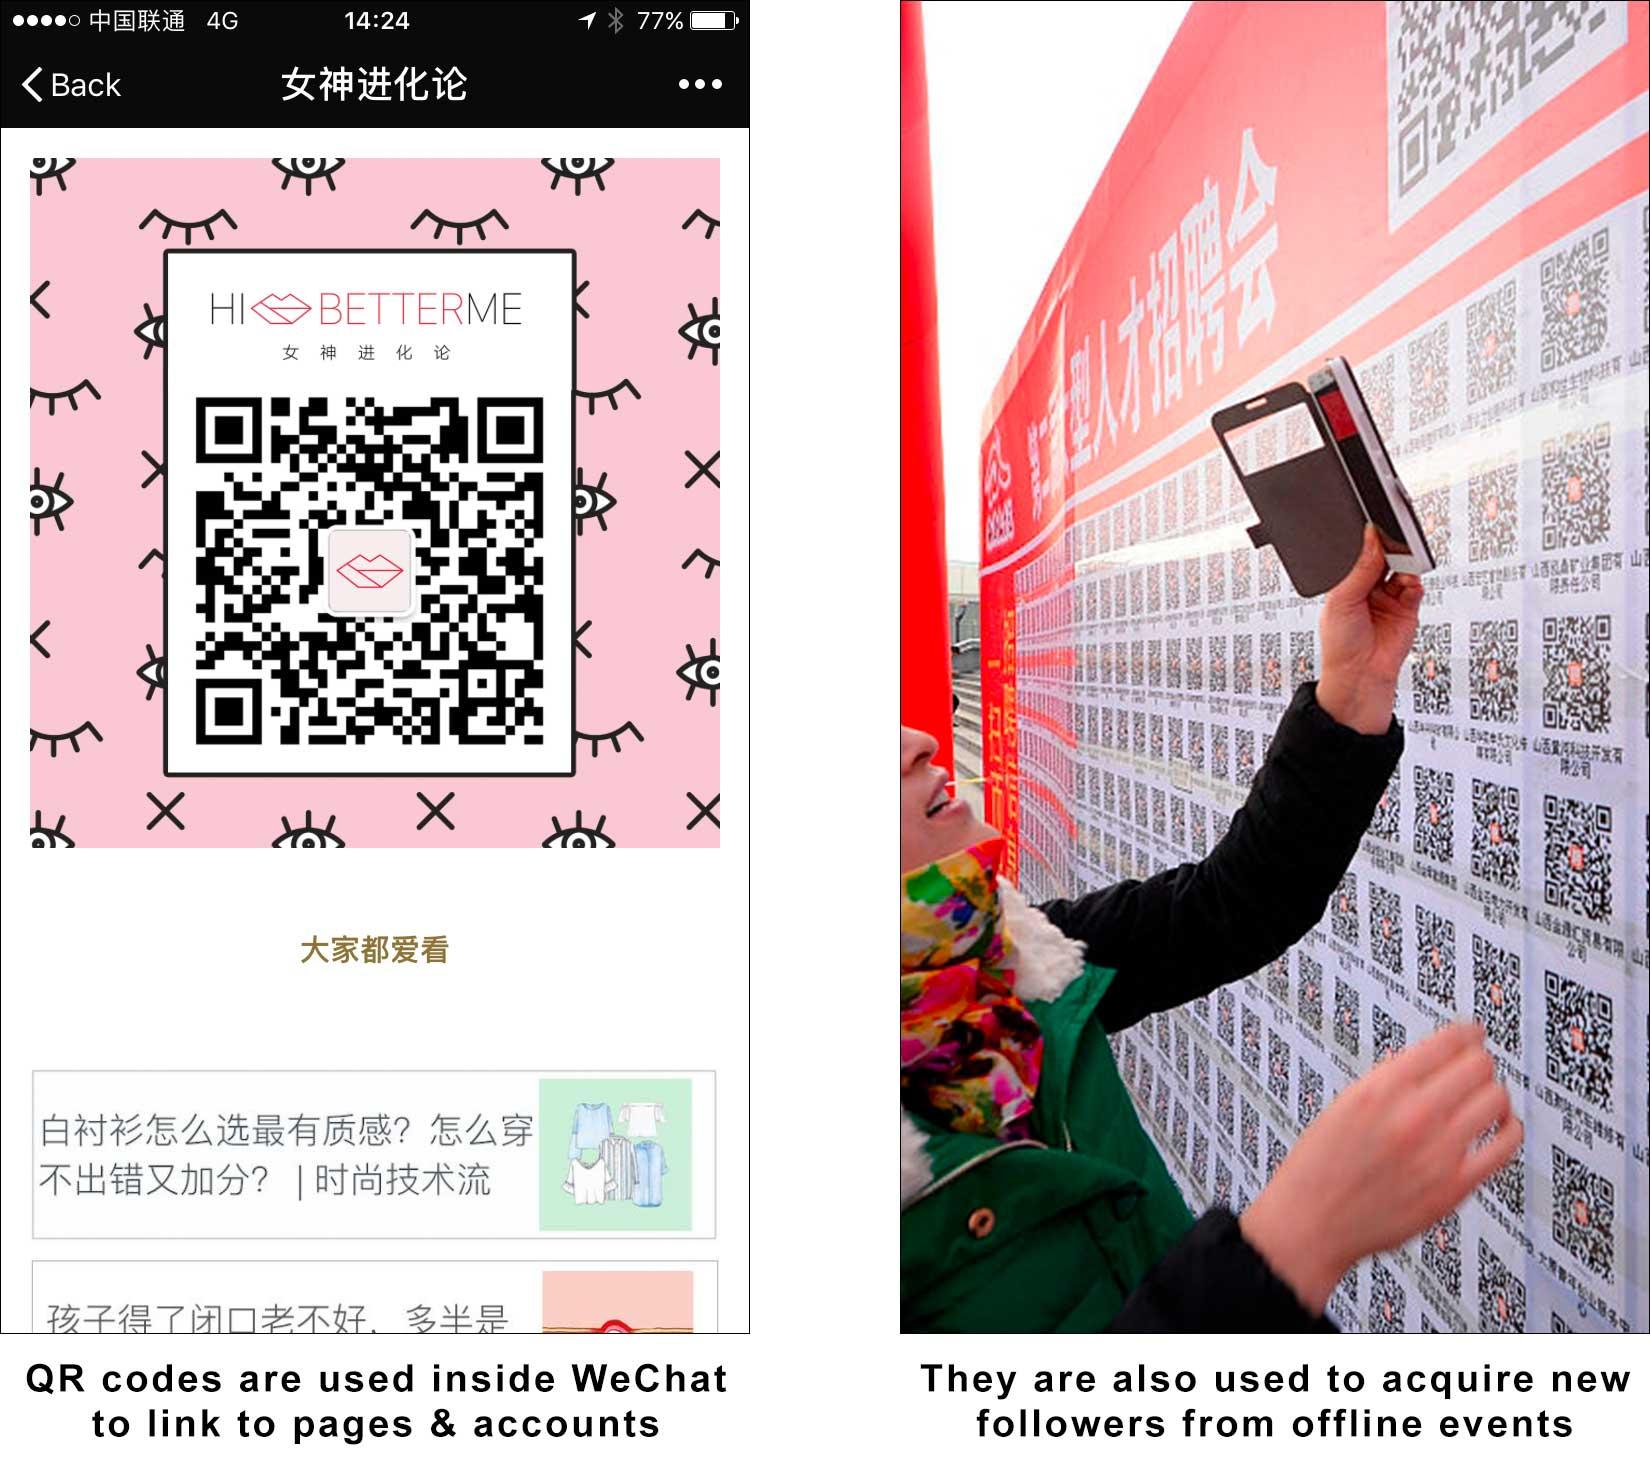 wechat official account marketing